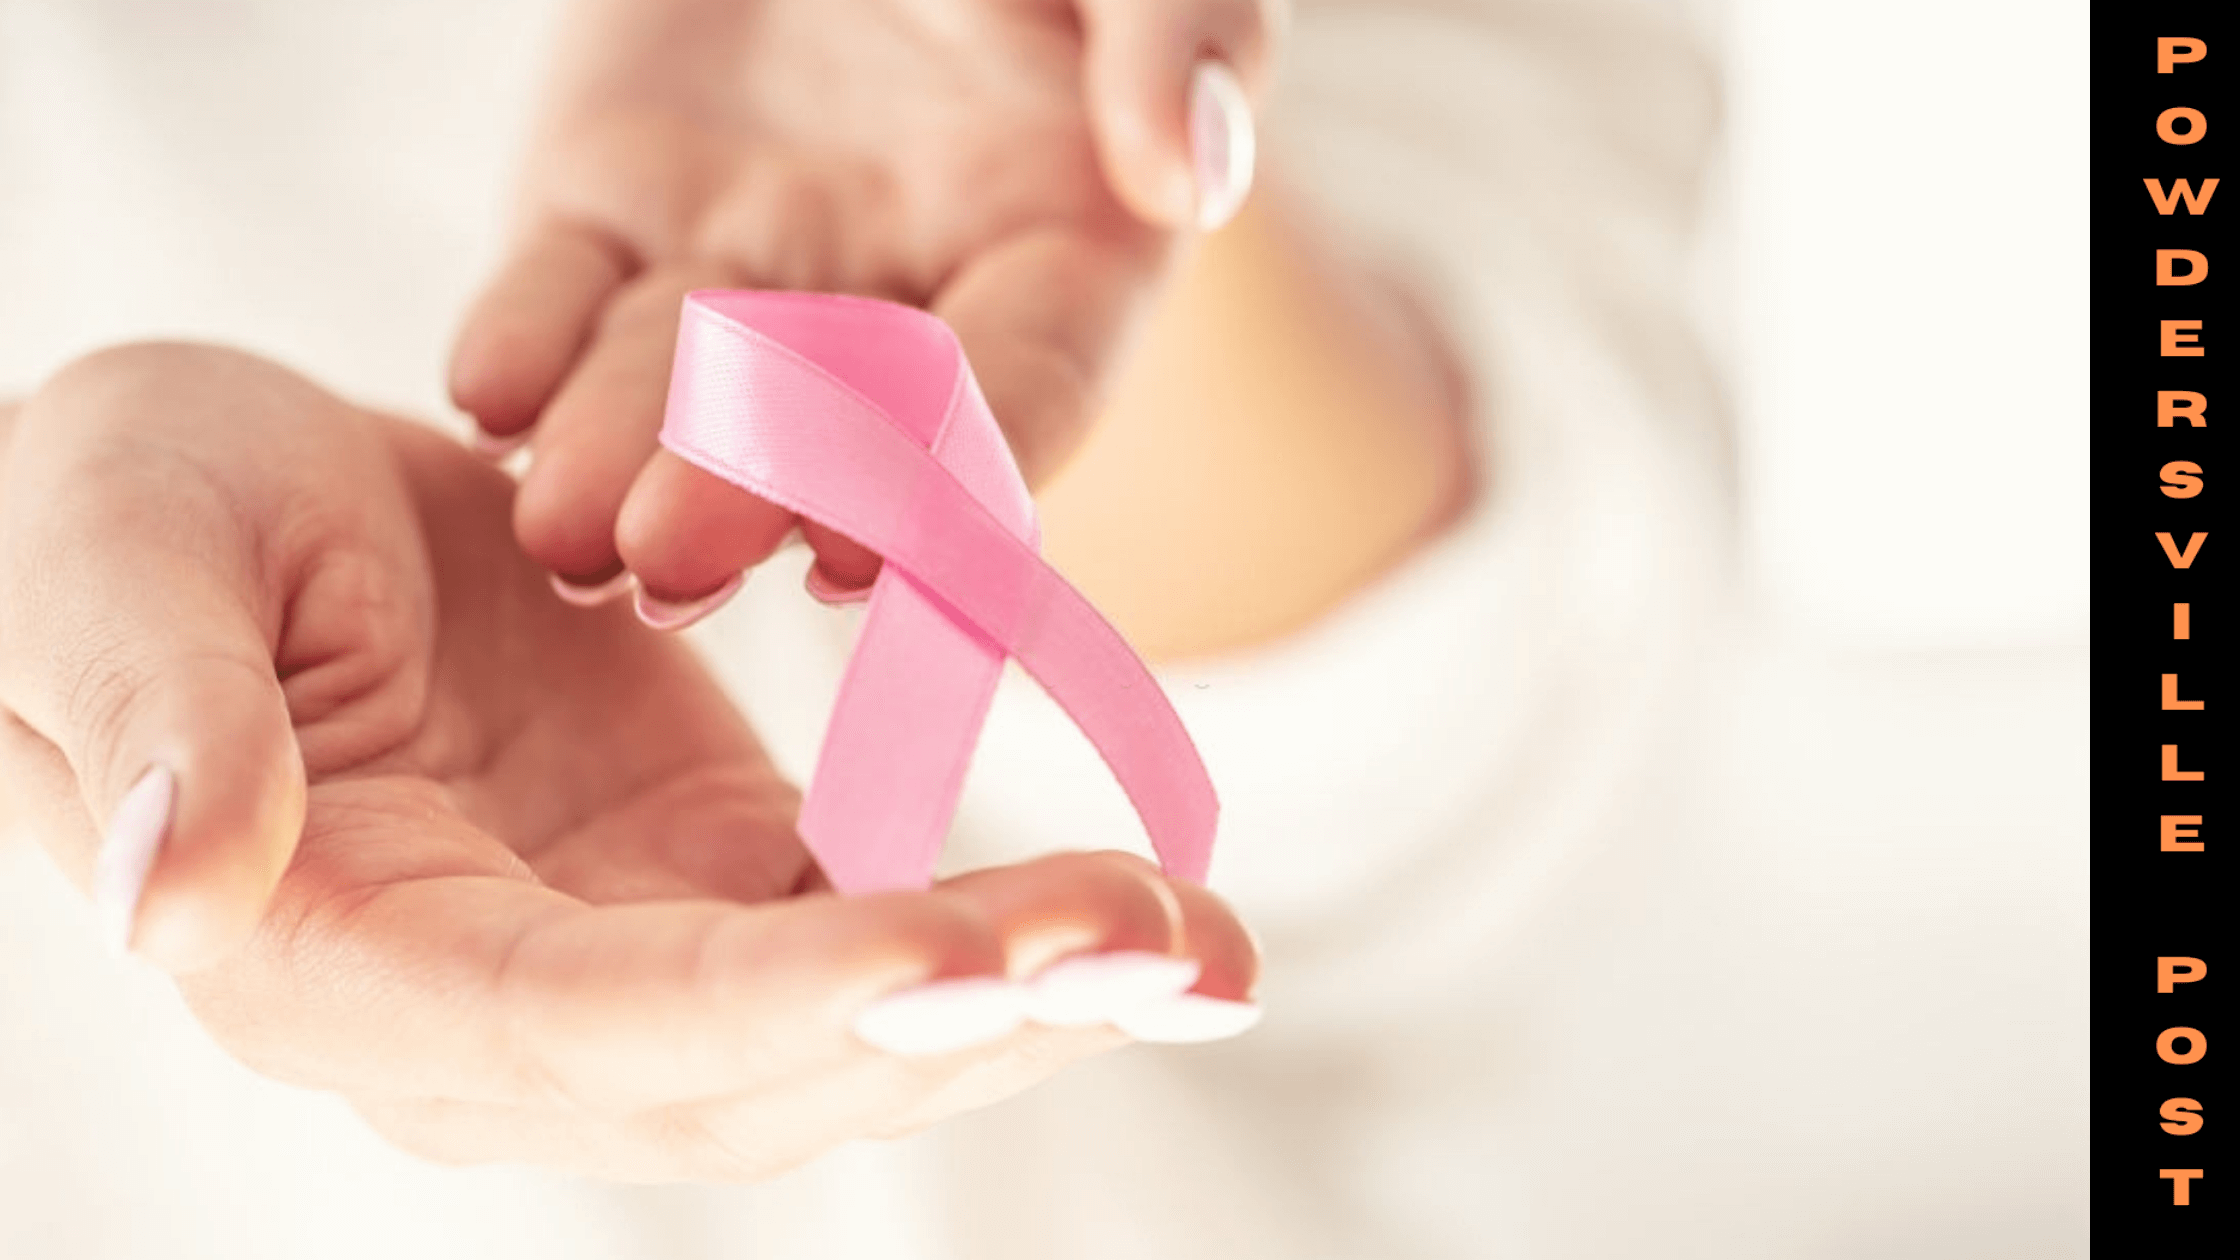 Advanced-Breast-Cancers-Can-Be-Treated-With-Immunotherapy-Treatment